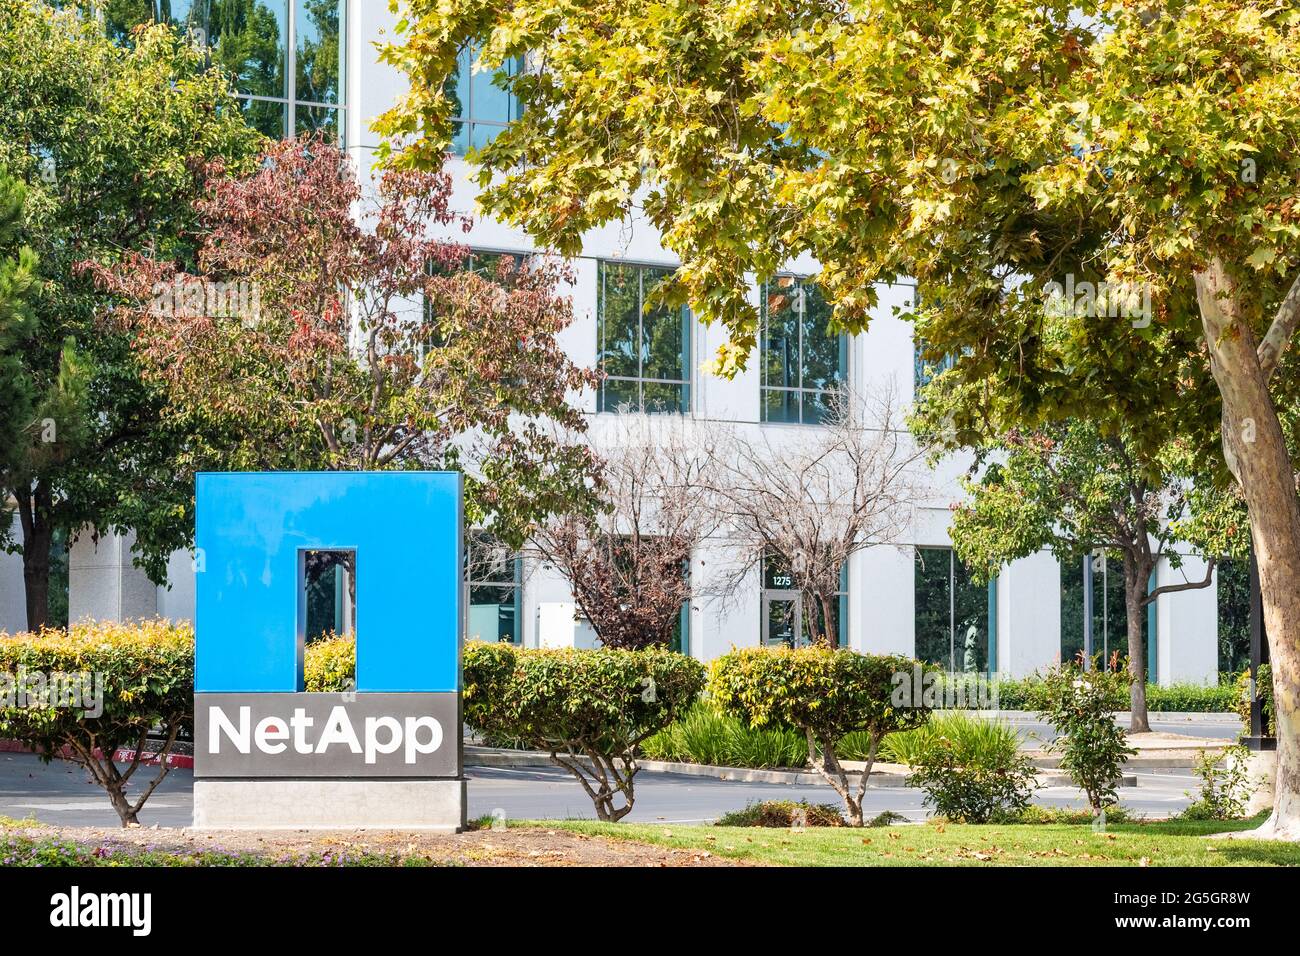 Oct 8, 2020 Sunnyvale / CA / USA - NetApp headquarters in Silicon Valley; NetApp, Inc. is a hybrid cloud data services and data management company Stock Photo